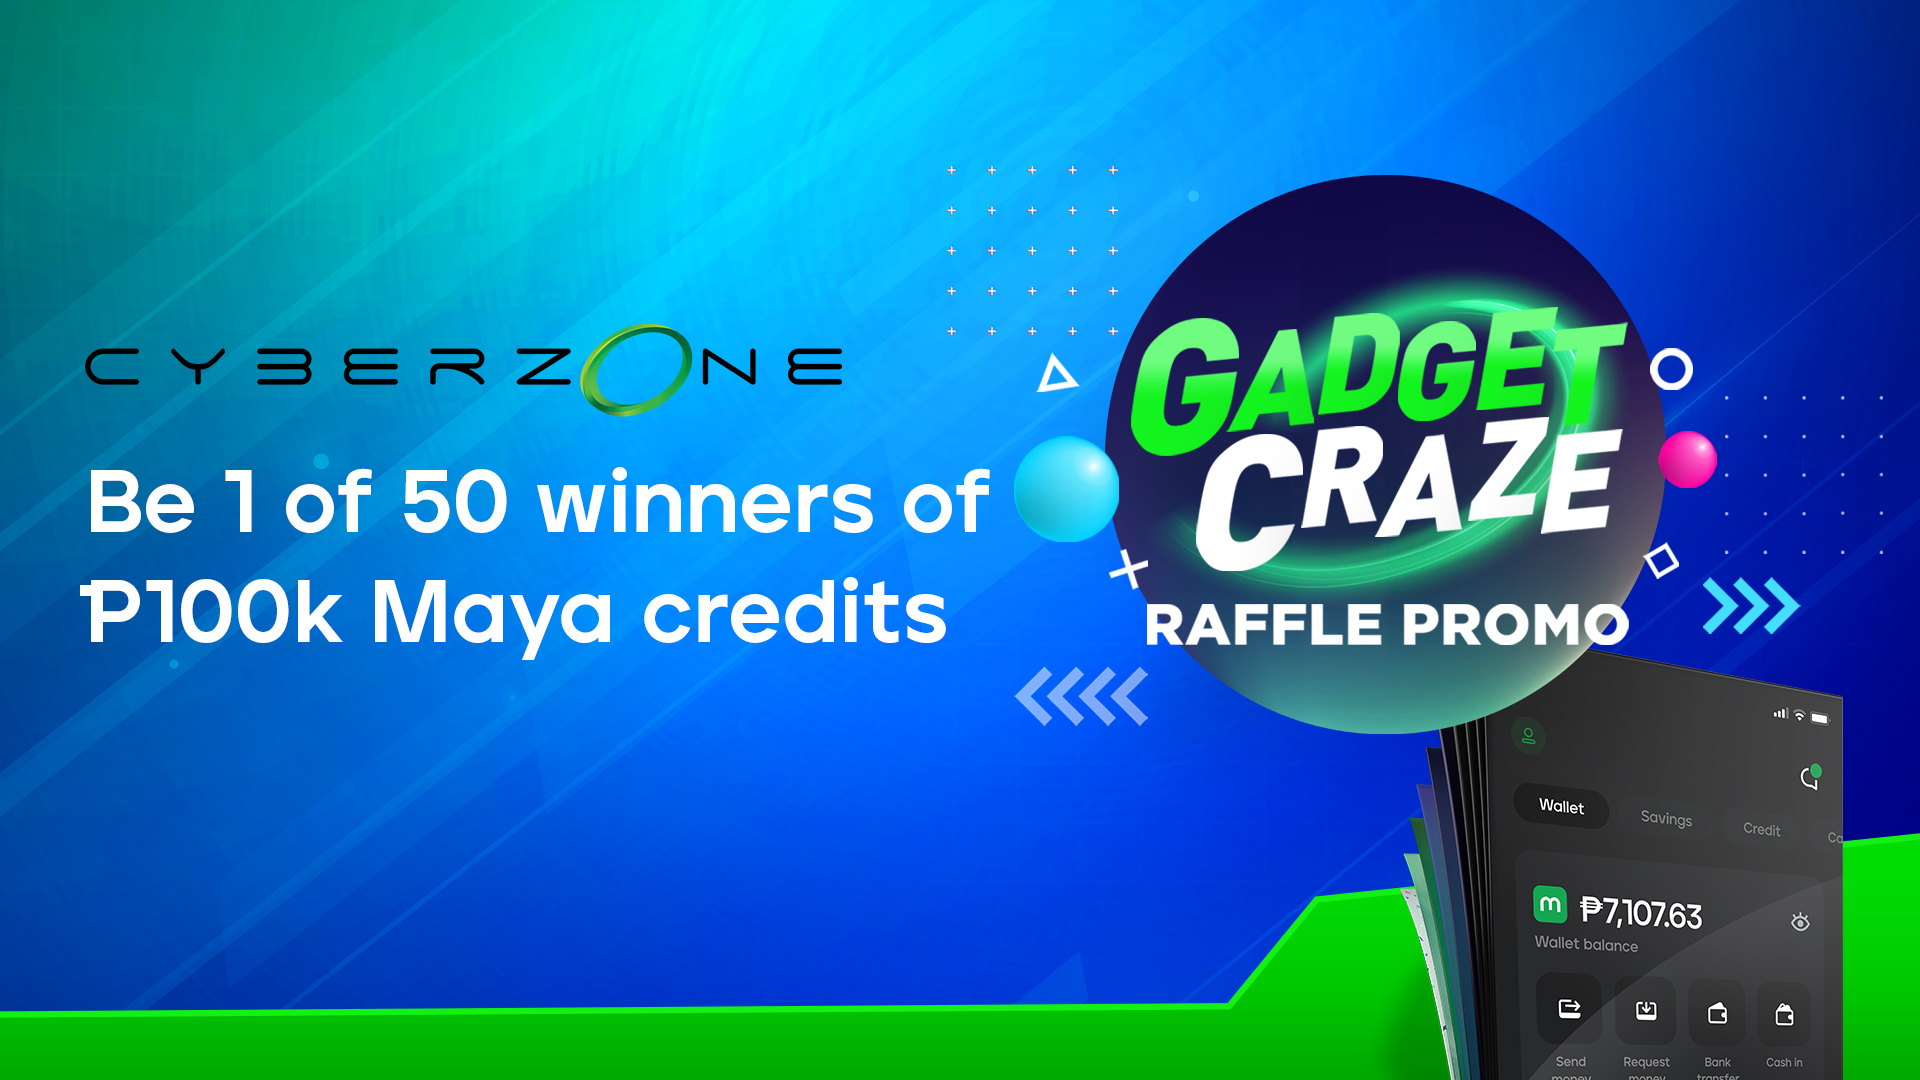 Get a chance to win P10,000 or receive P100 cashback with SM Cyberzone